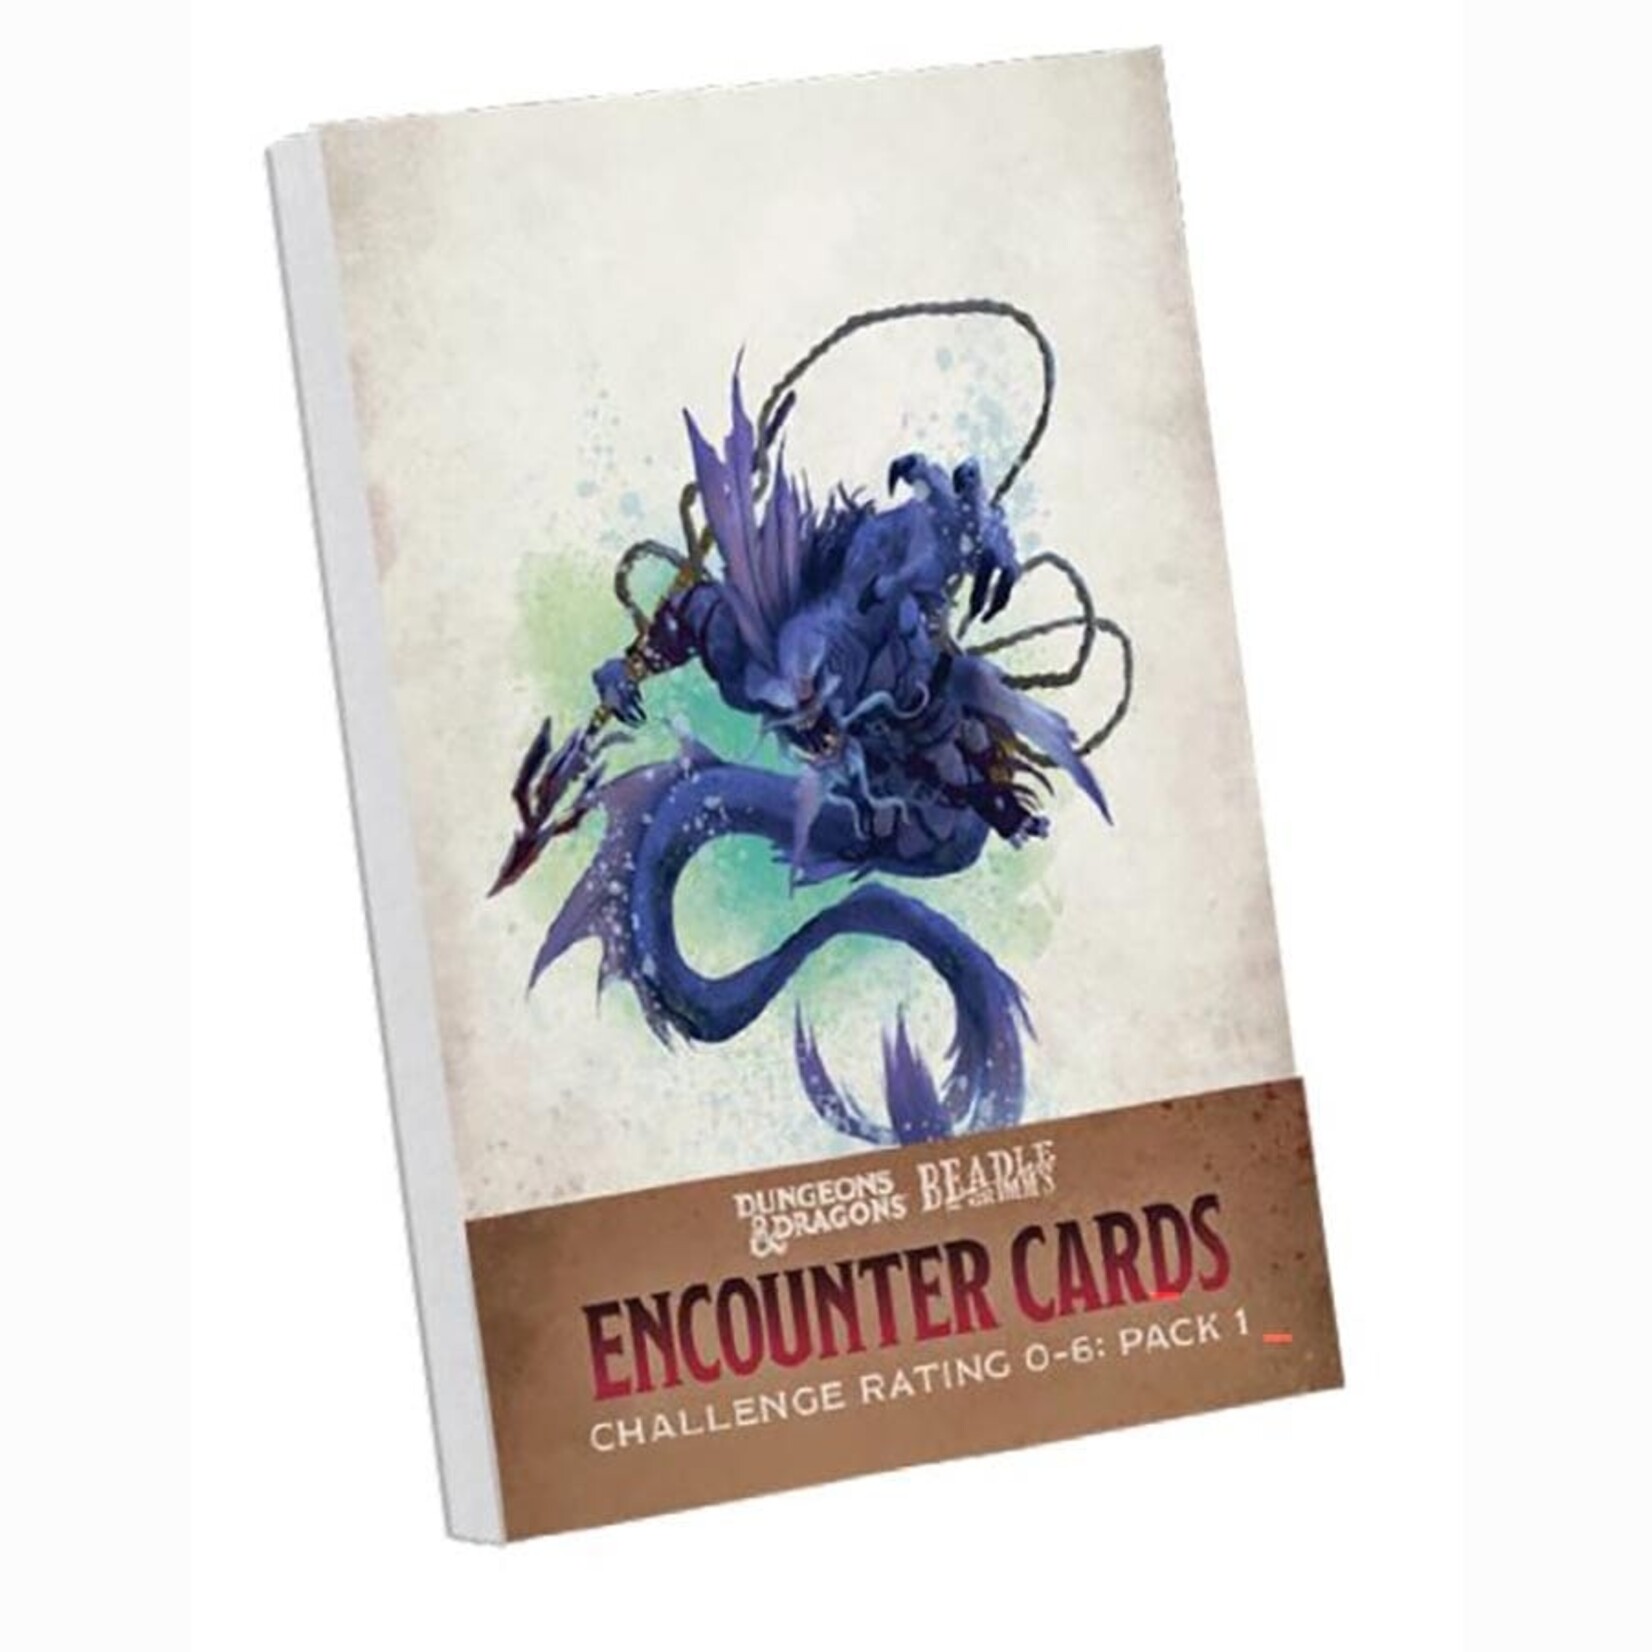 Beadle & Grimm's D&D: Encounter Cards - Challenge Rating 0-6 (Pack 1)